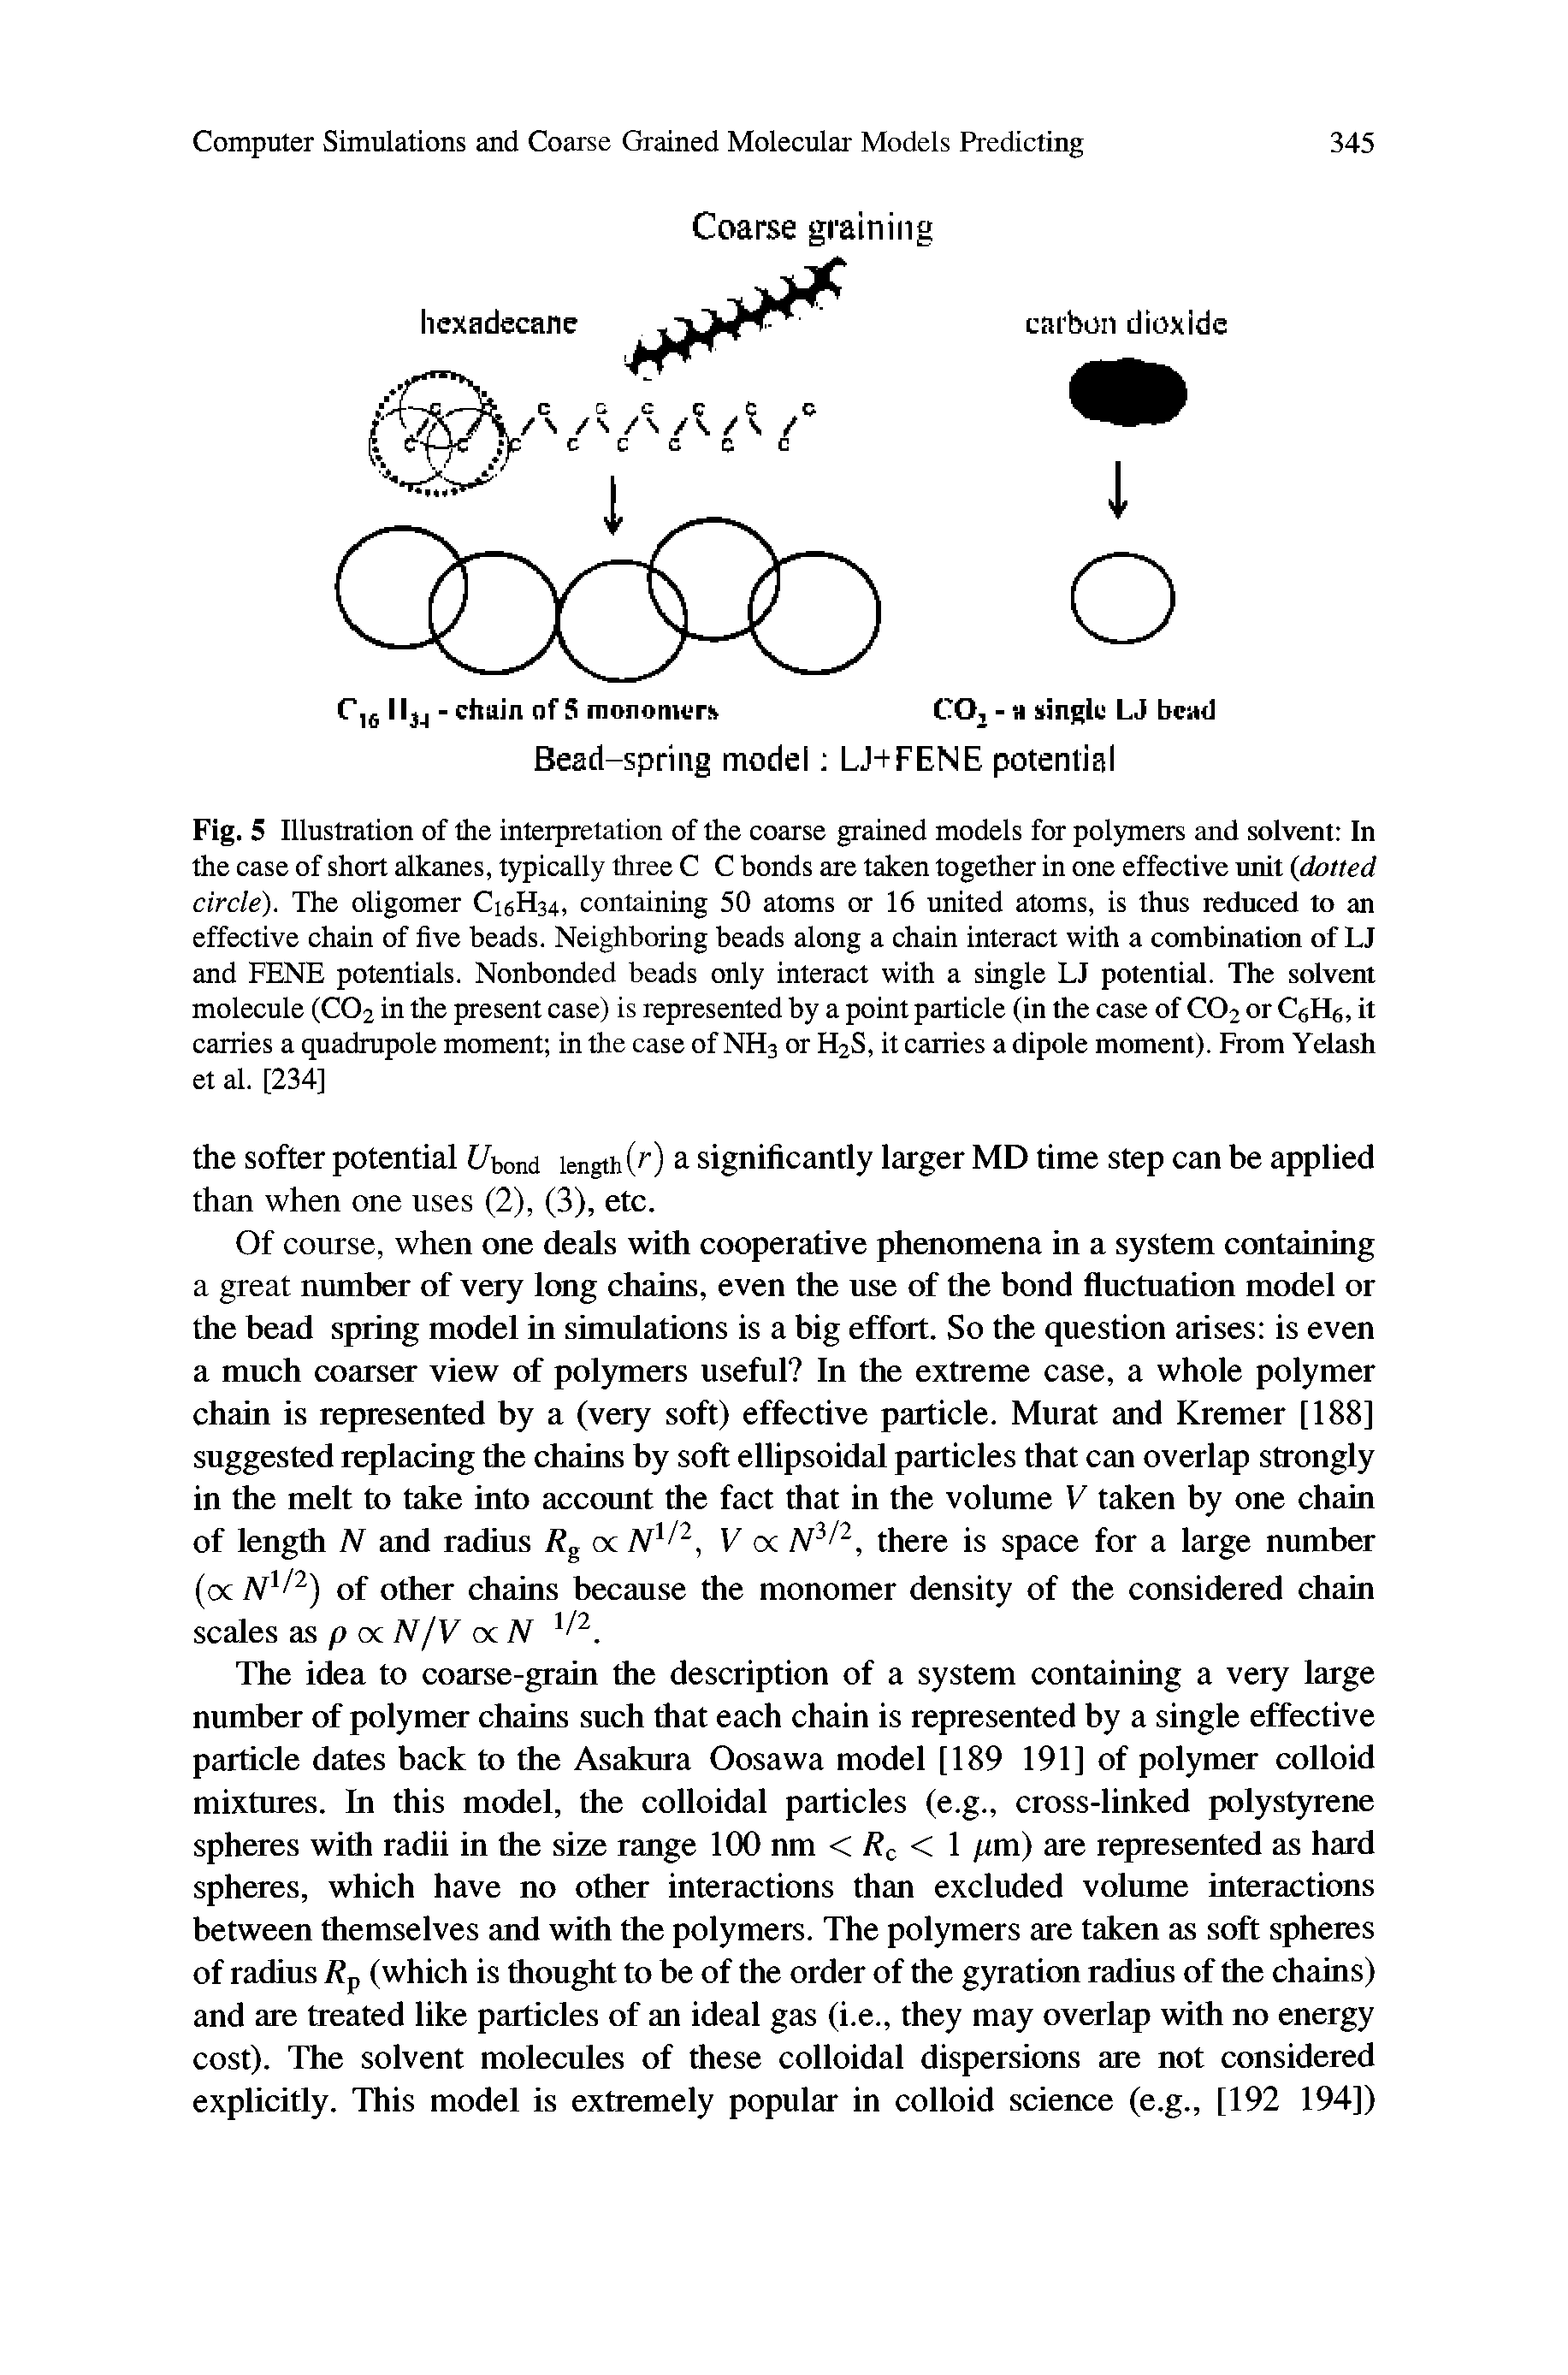 Fig. 5 Illustration of the interpretation of the coarse grained models for polymers and solvent In the case of short alkanes, typically three C C bonds are taken together in one effective unit (dotted circle). The oligomer C16H34, containing 50 atoms or 16 united atoms, is thus reduced to an effective chain of five beads. Neighboring beads along a chain interact with a combinatirai of LJ and FENE potentials. Nonbonded beads only interact with a single LJ potential. The solvent molecule (CO2 in the present case) is represented by a point particle (in the case of CO2 or C6H6, it carries a quadrupole moment in the case of NH3 or H2S, it carries a dipole moment). From Yelash et al. [234]...